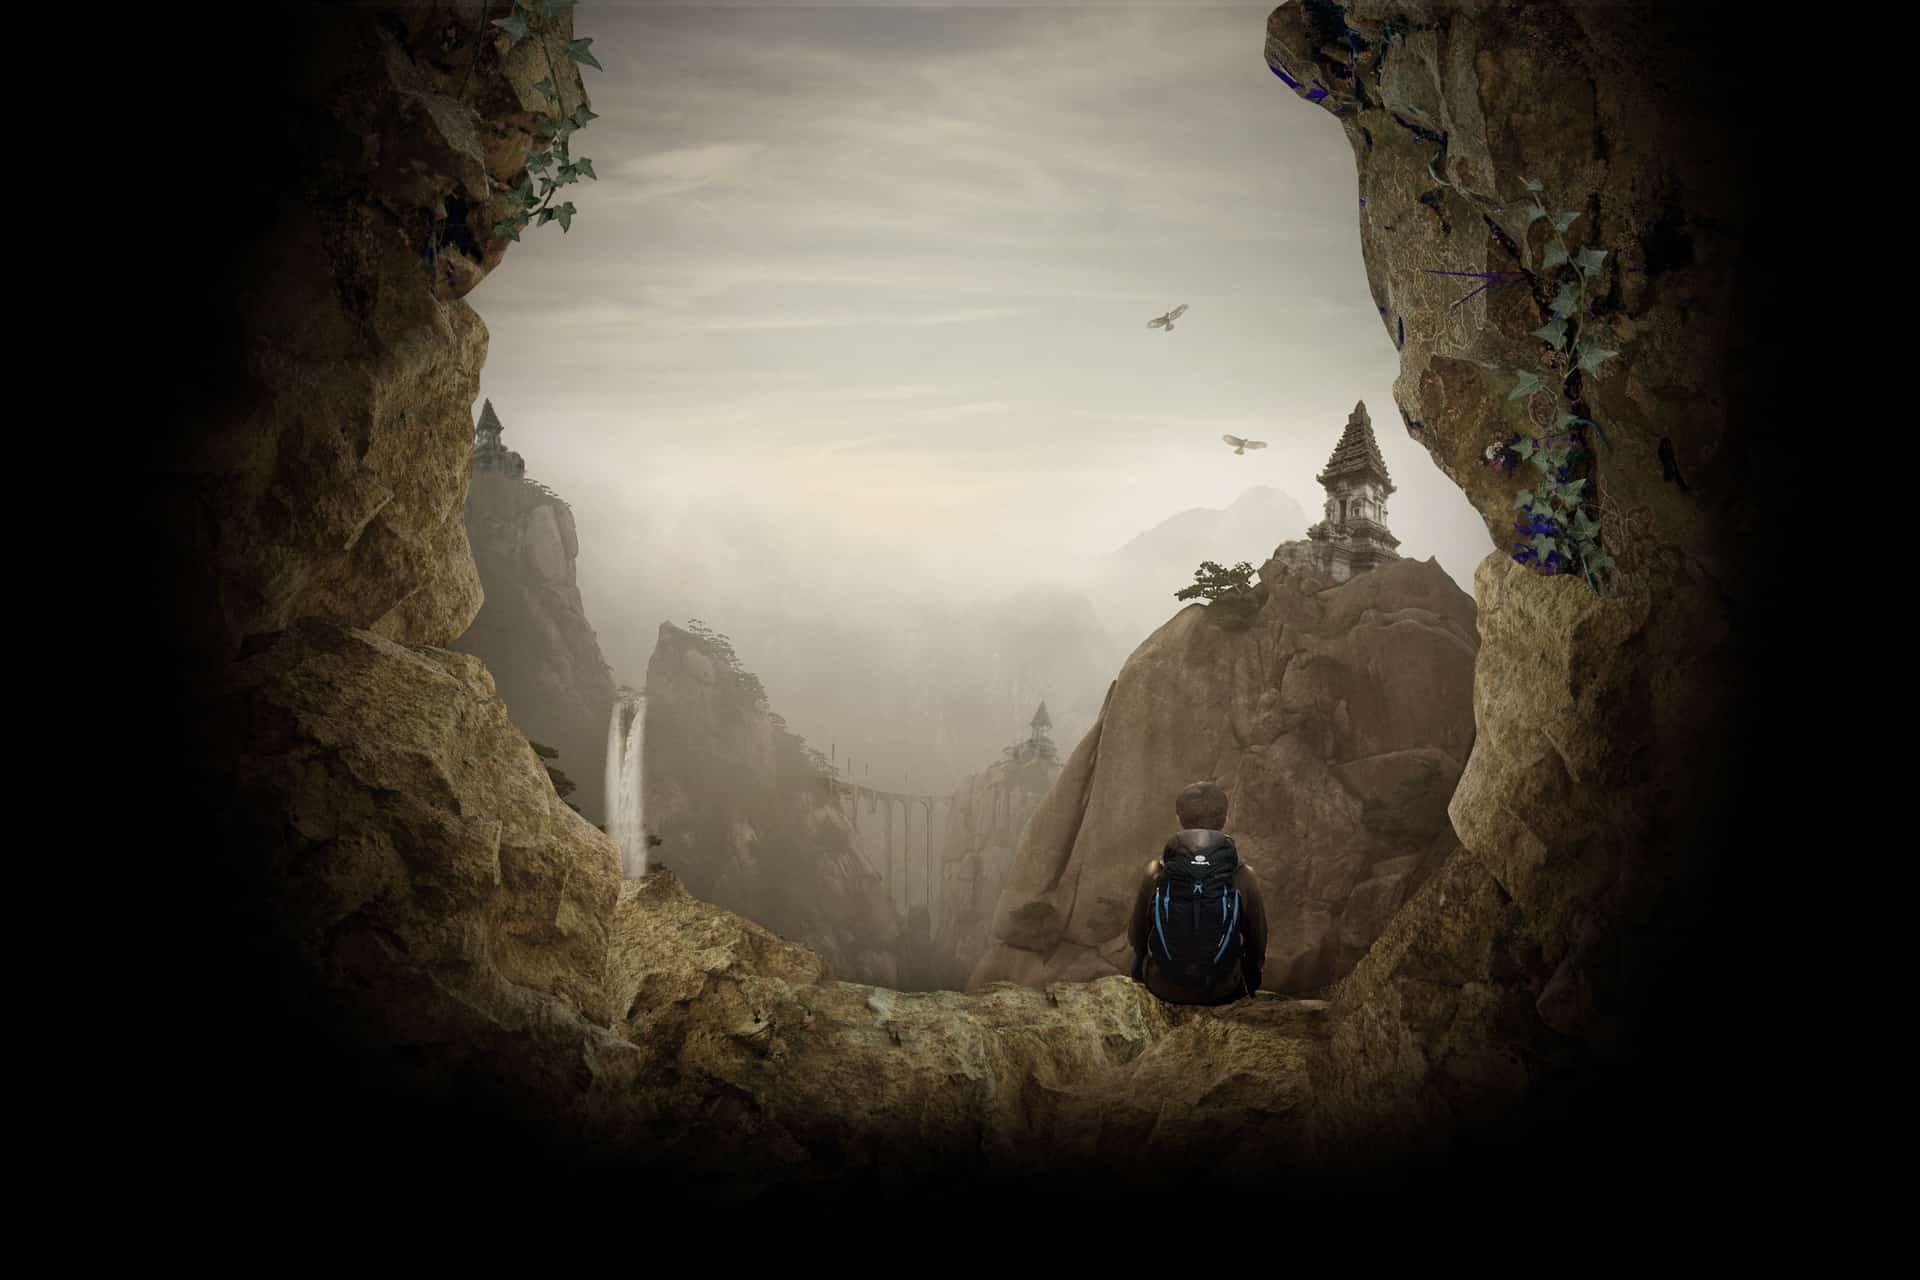 Create an Otherworldly Scene of a Climber in a Cave in Photoshop